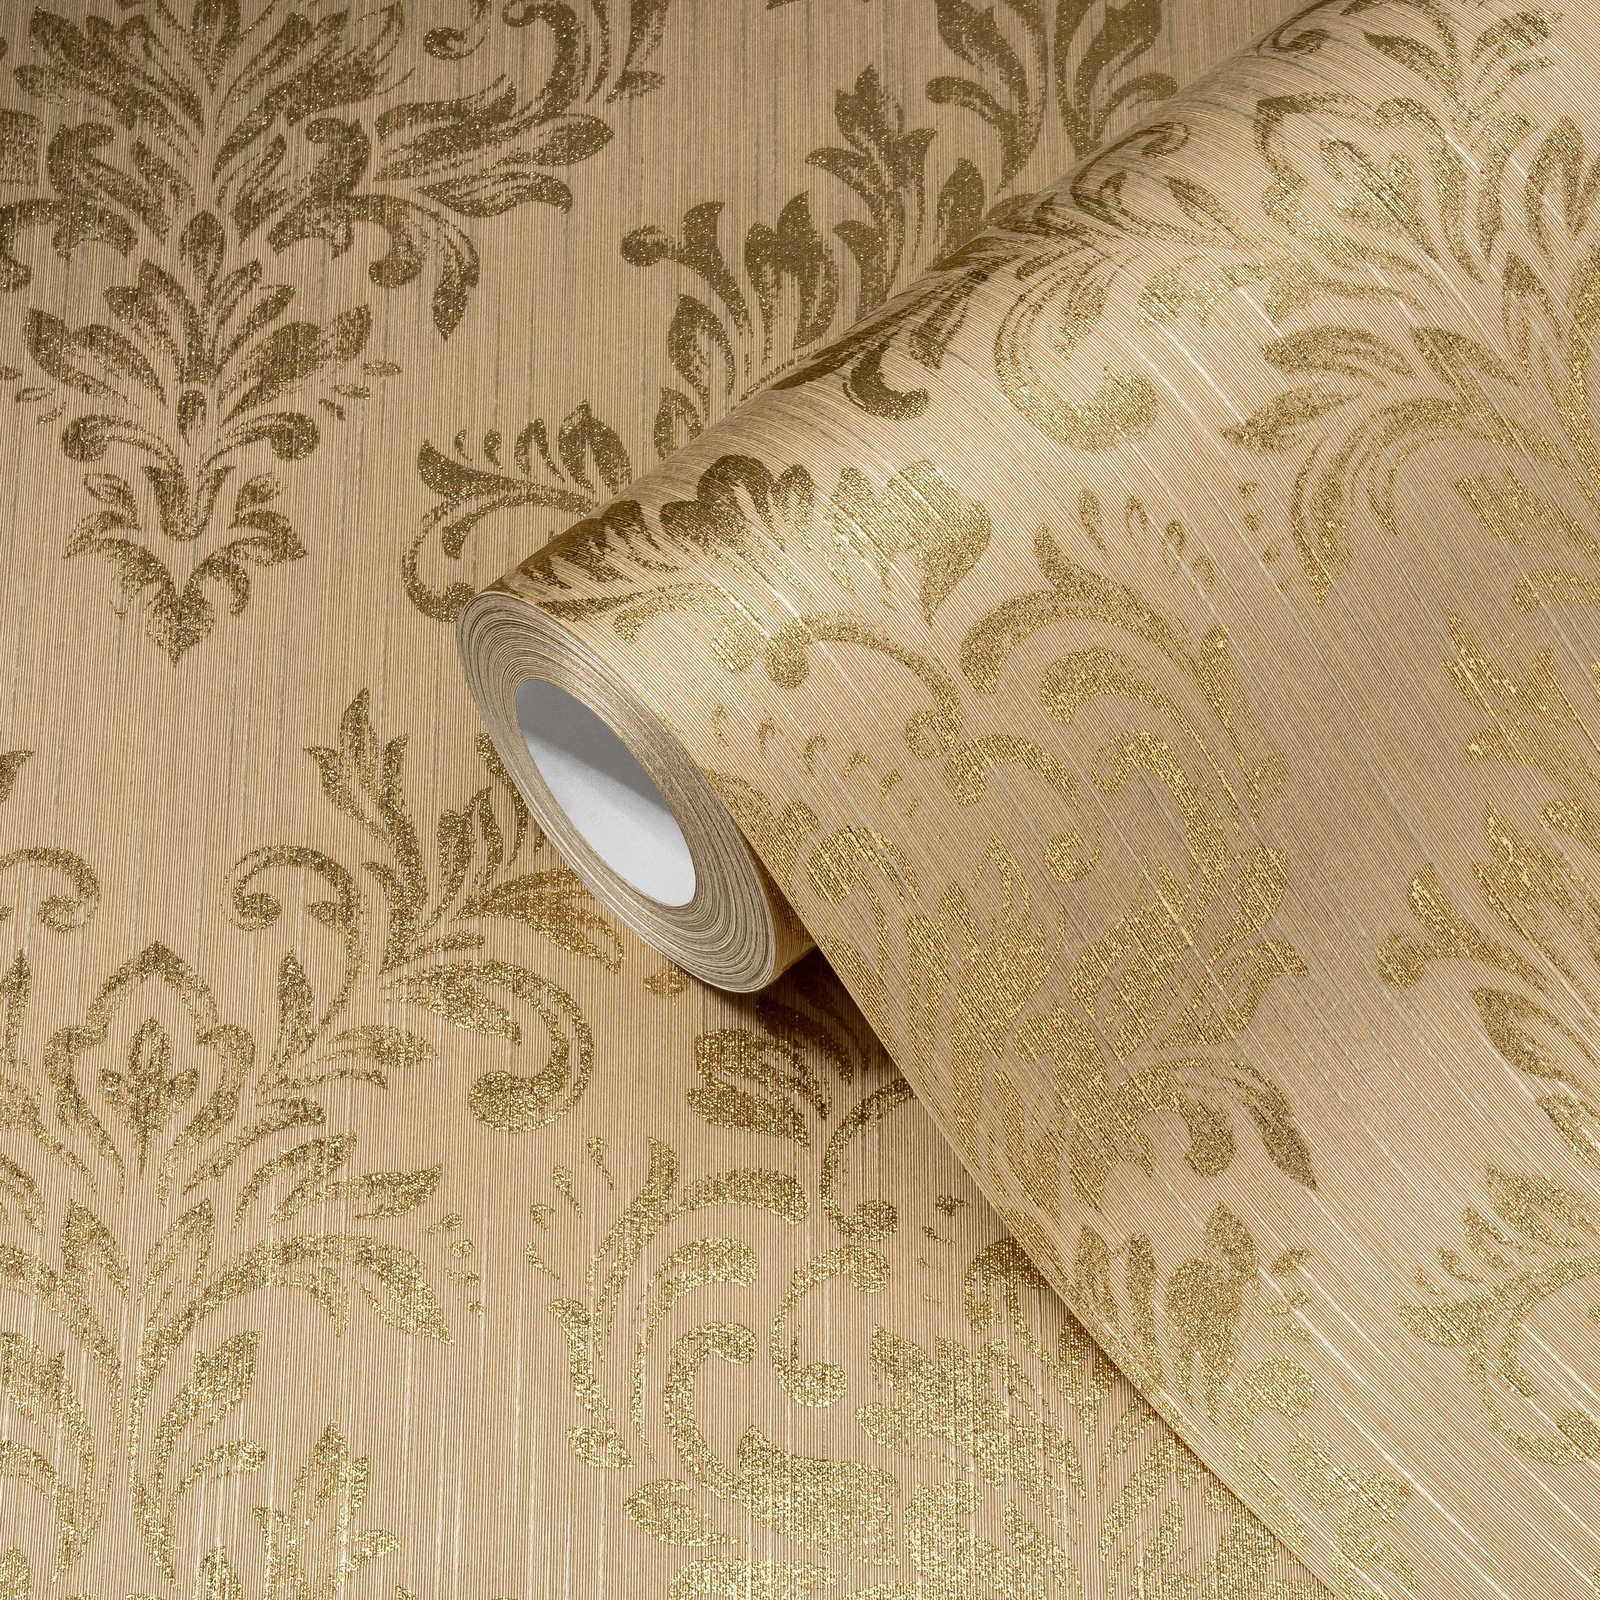             Ornament wallpaper floral with gold glitter effect - gold, beige
        